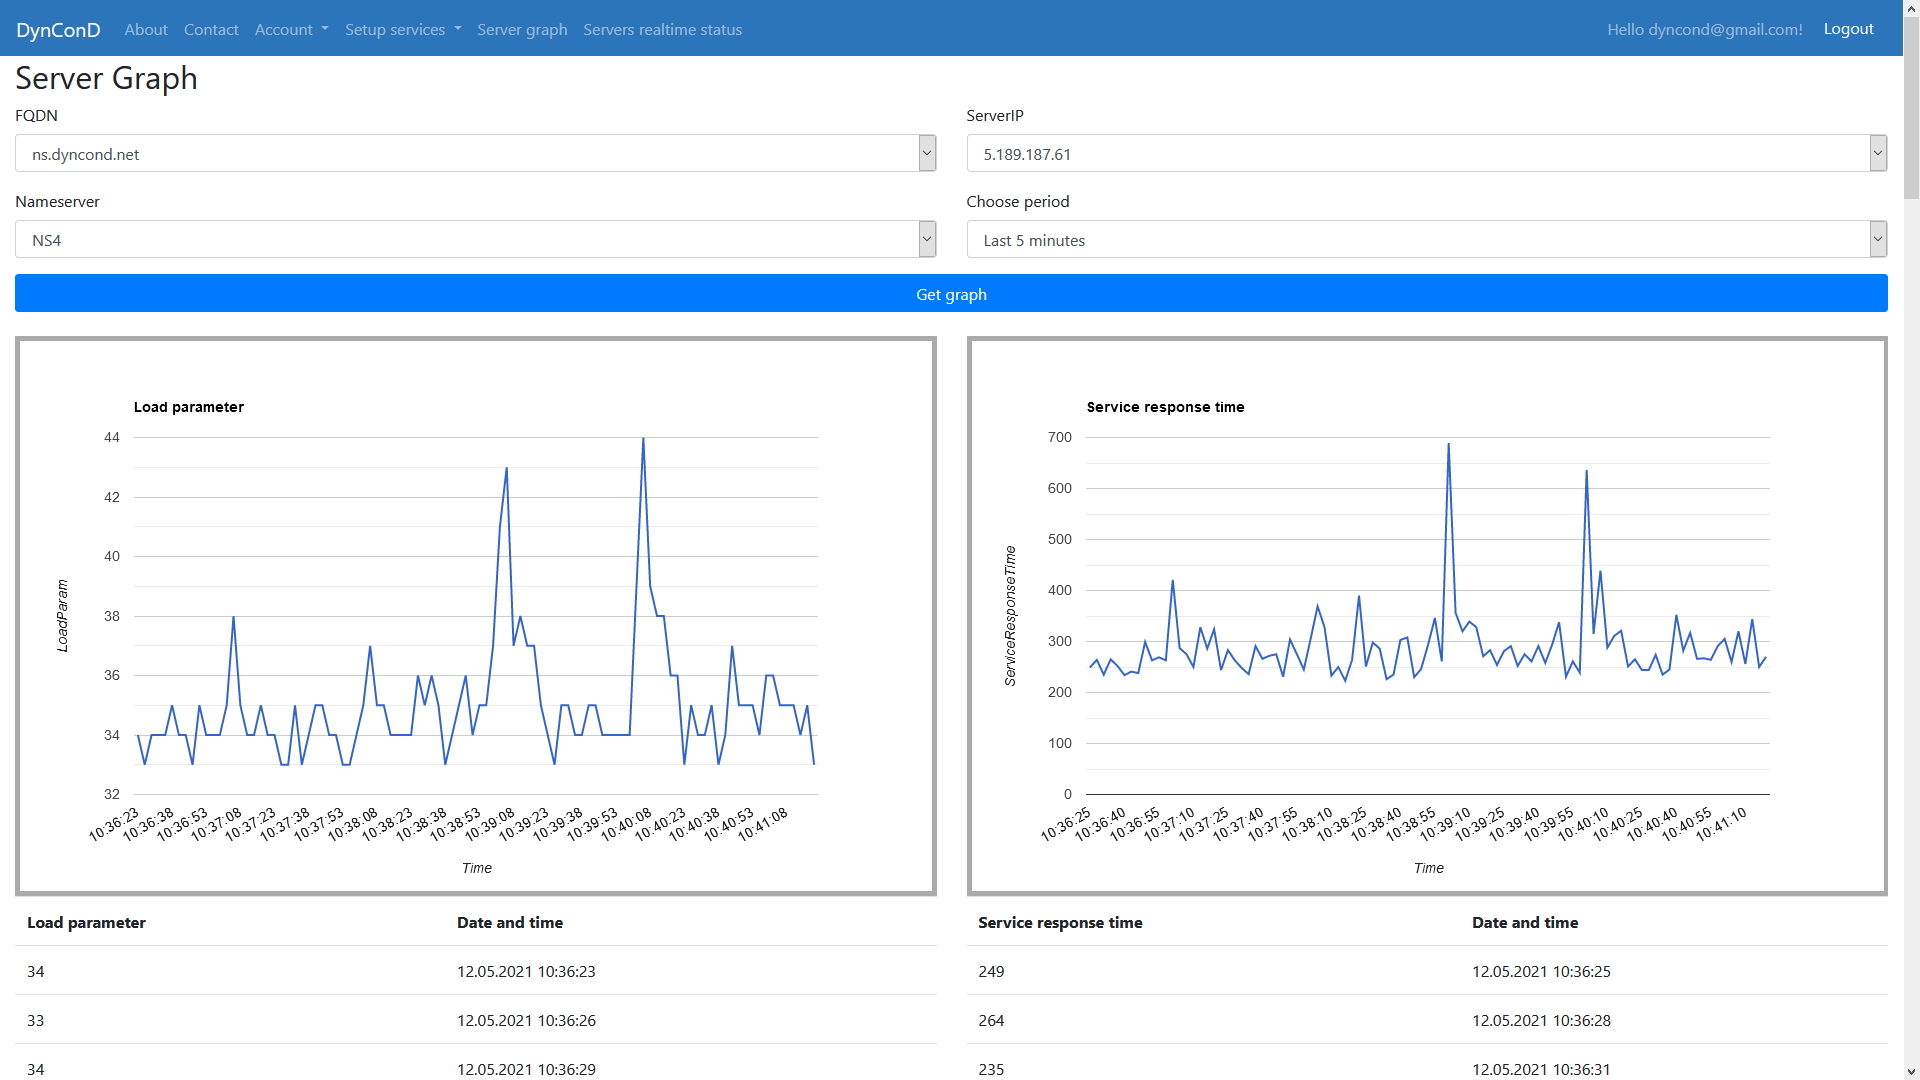 Real time graphs for server load and service response time